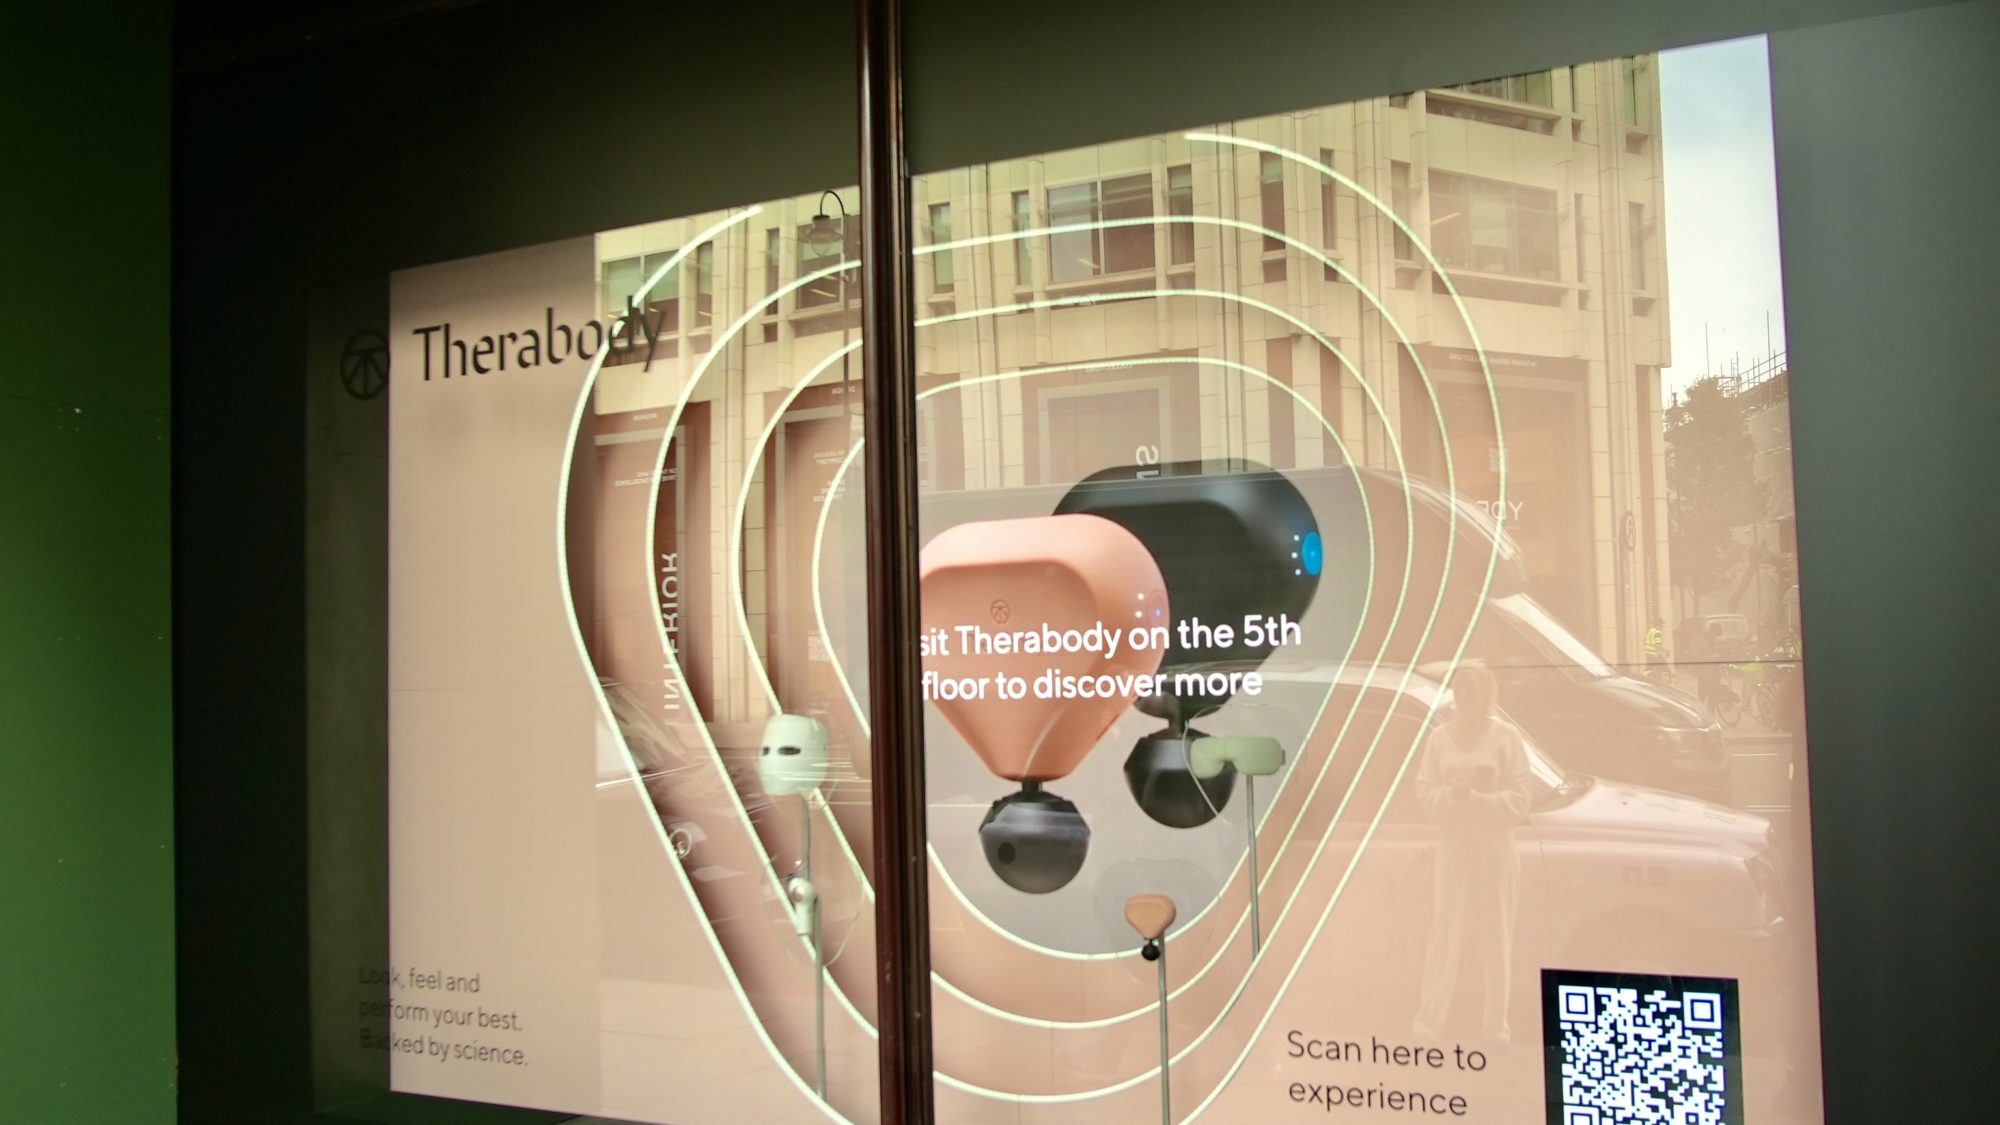 Harrods Tech Month sees wellness brand Therabody stage interactive window experience